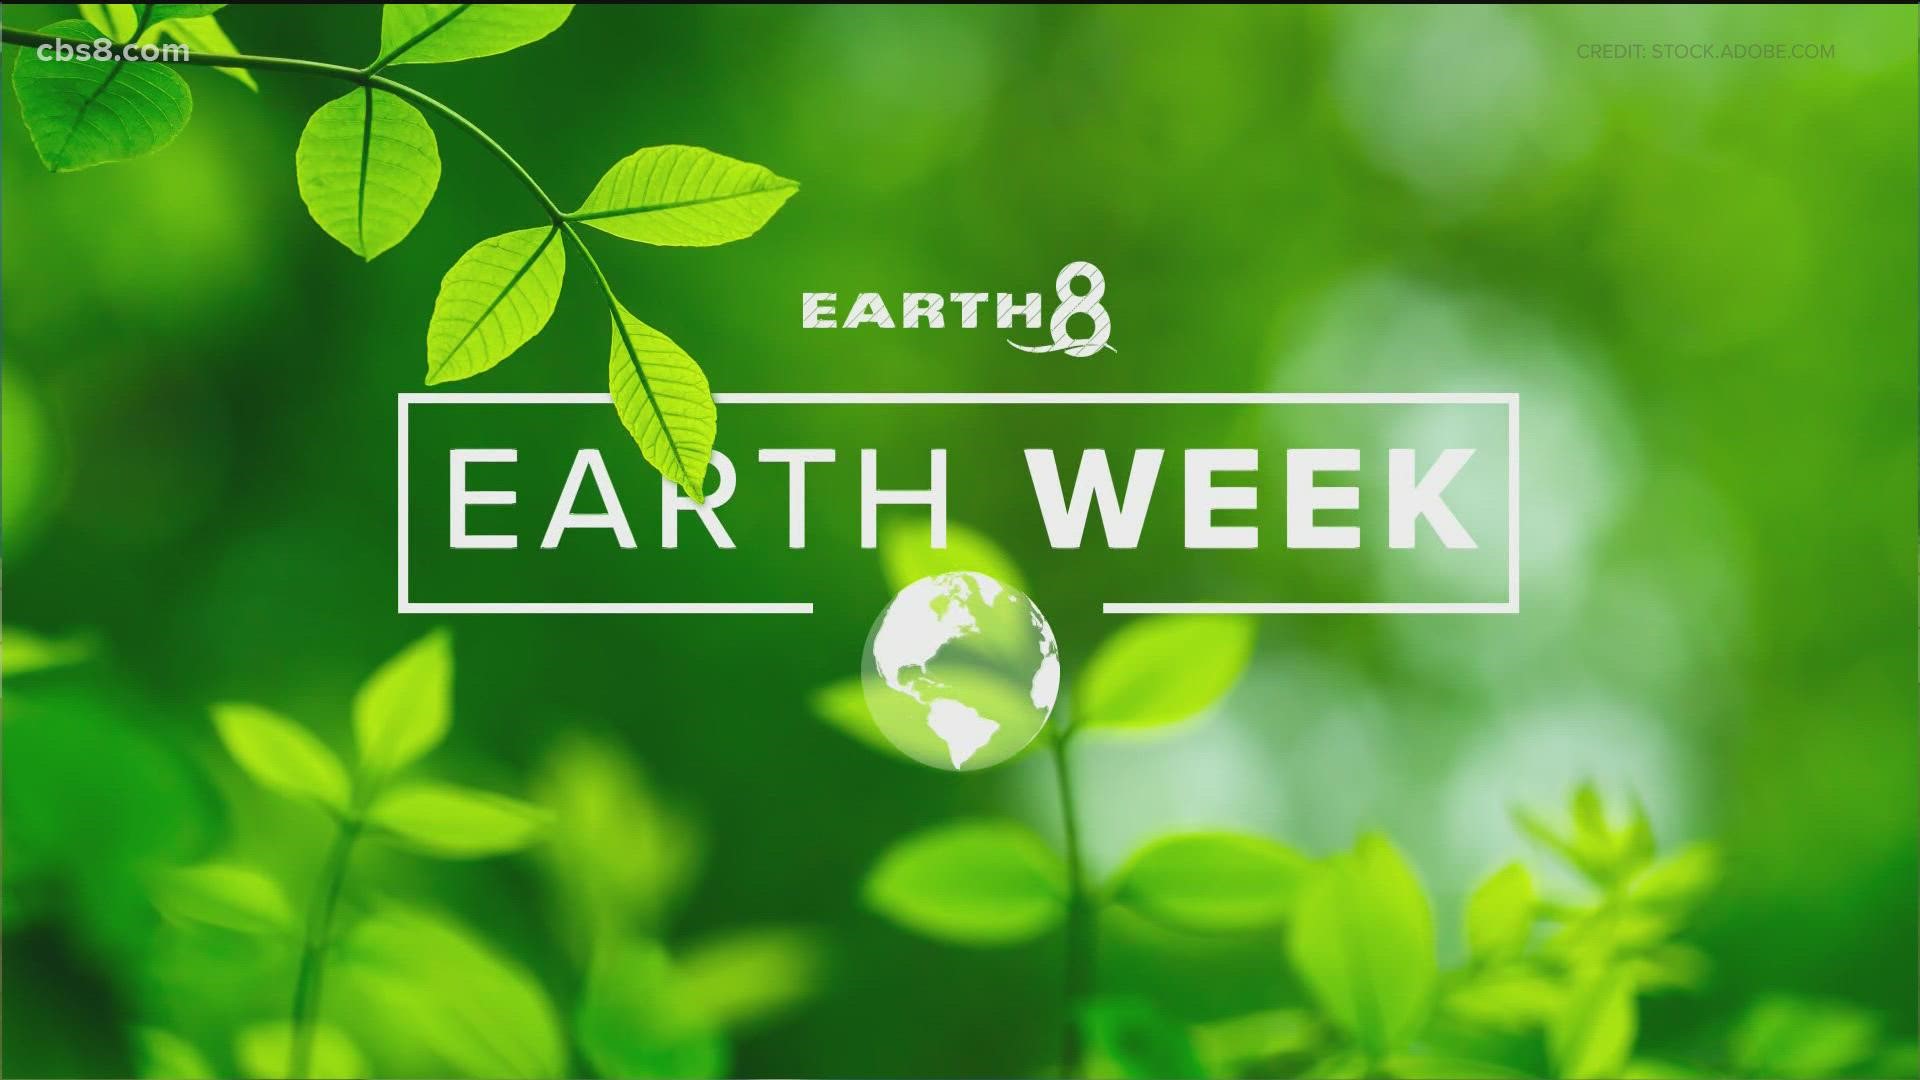 It's Earth Day this week and CBS 8 meteorologist Shawn Styles talked with SD County Supervisor Terra Lawson-Remer about the county's climate change plan.